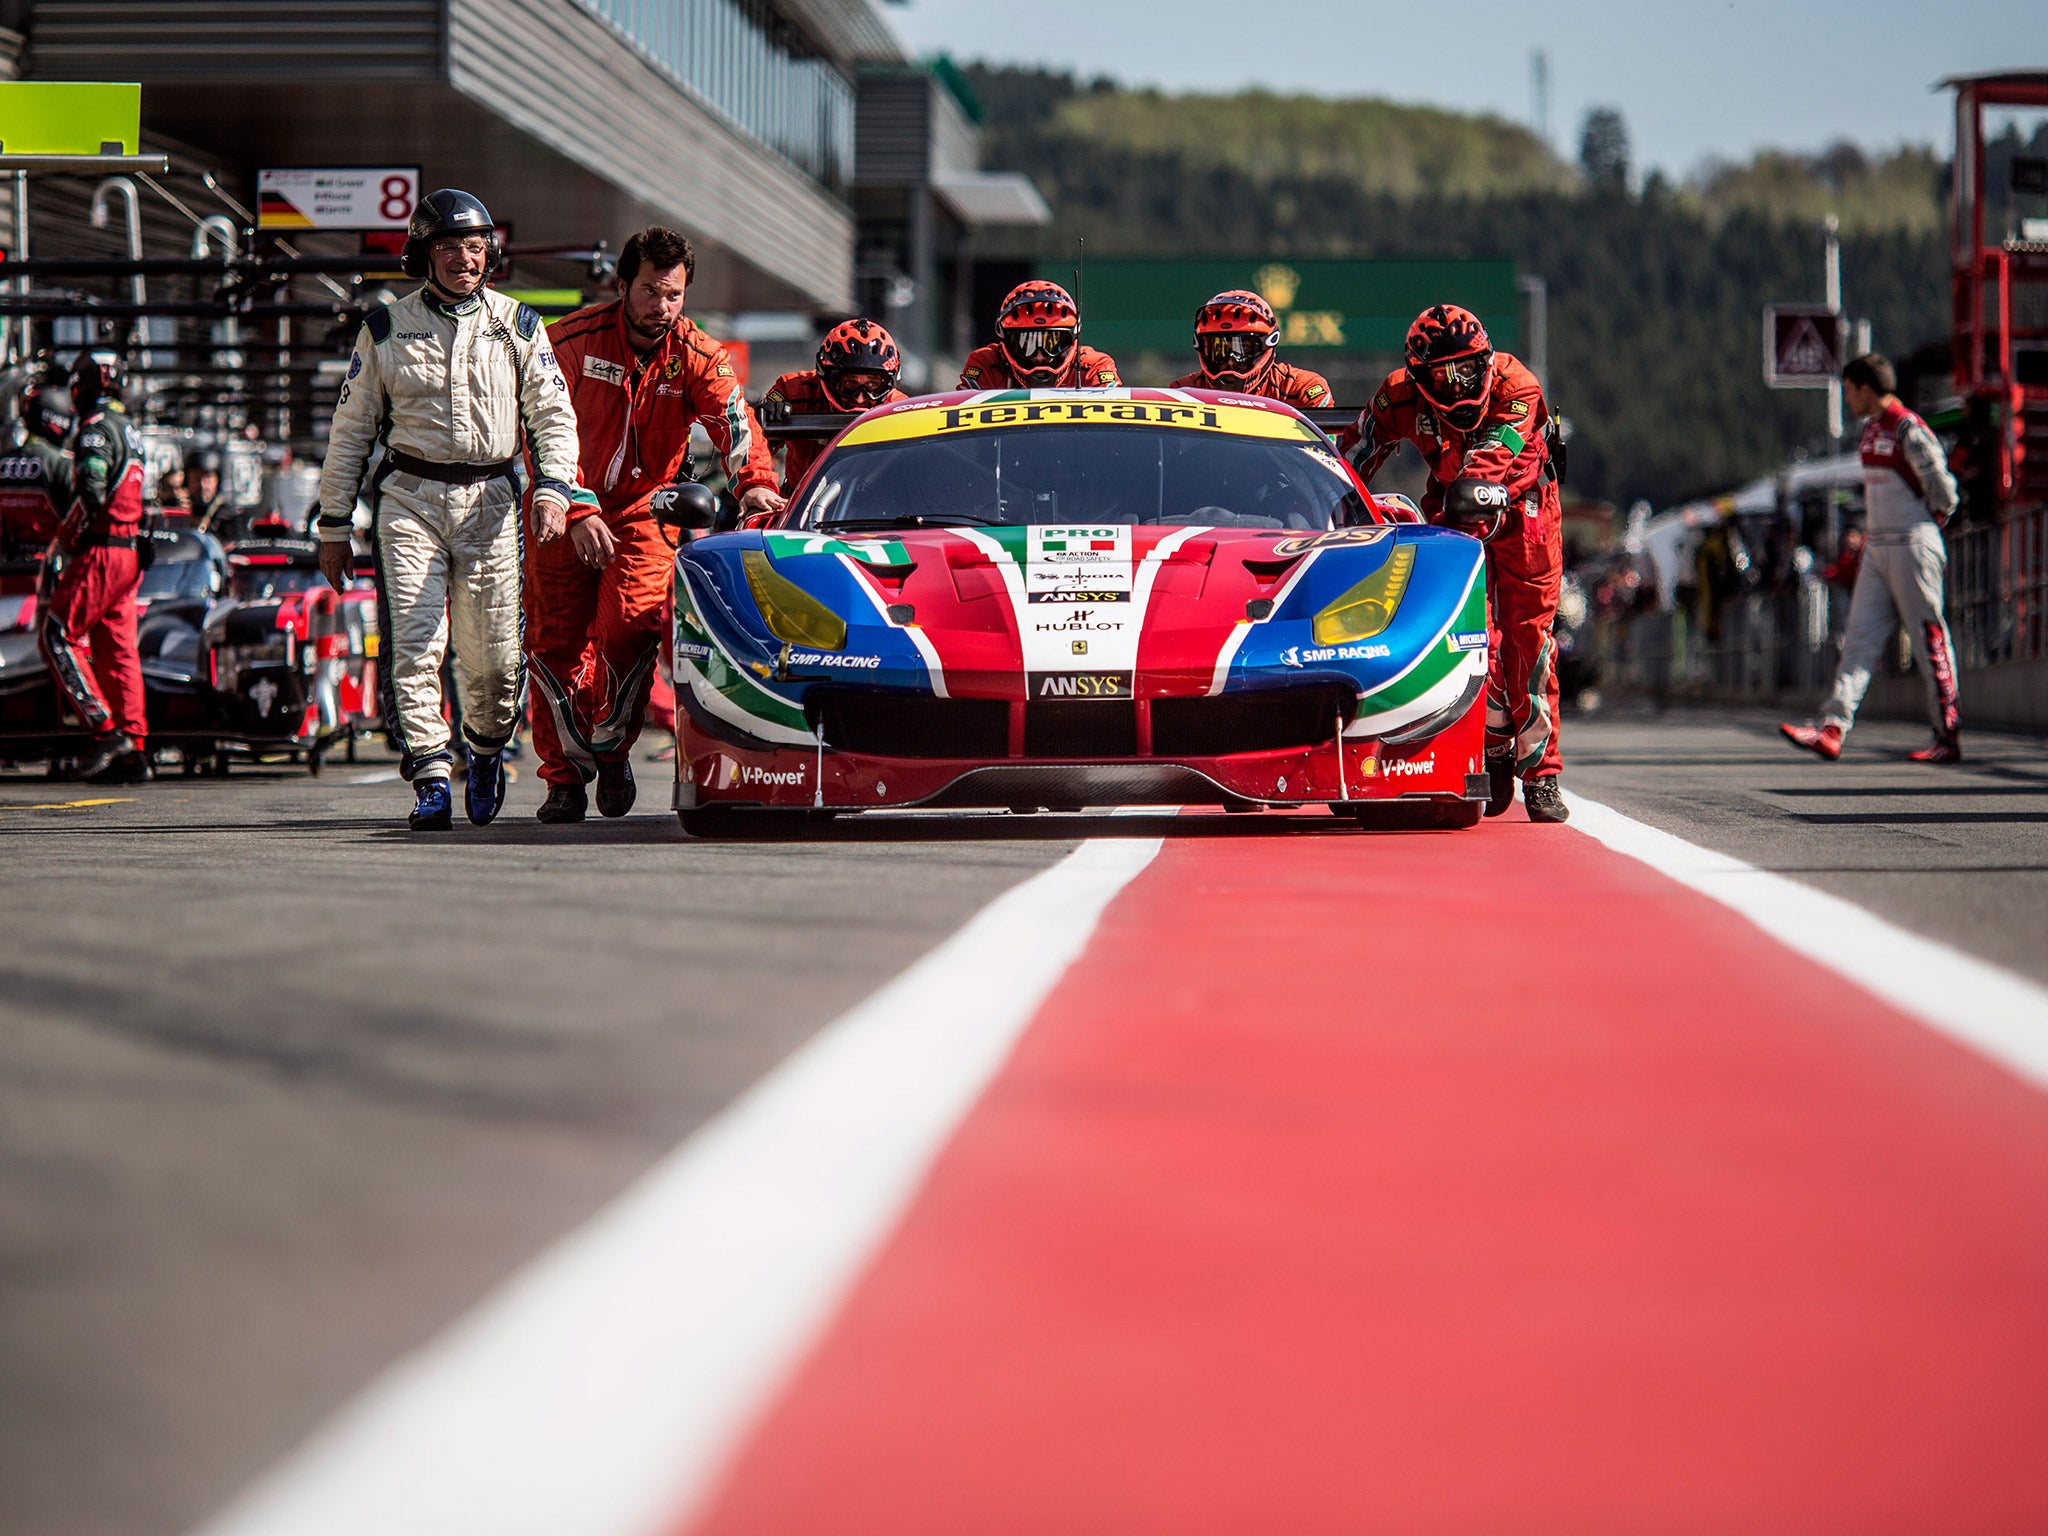 Bird and Rigon triumped in Spa as well as at Silverstone